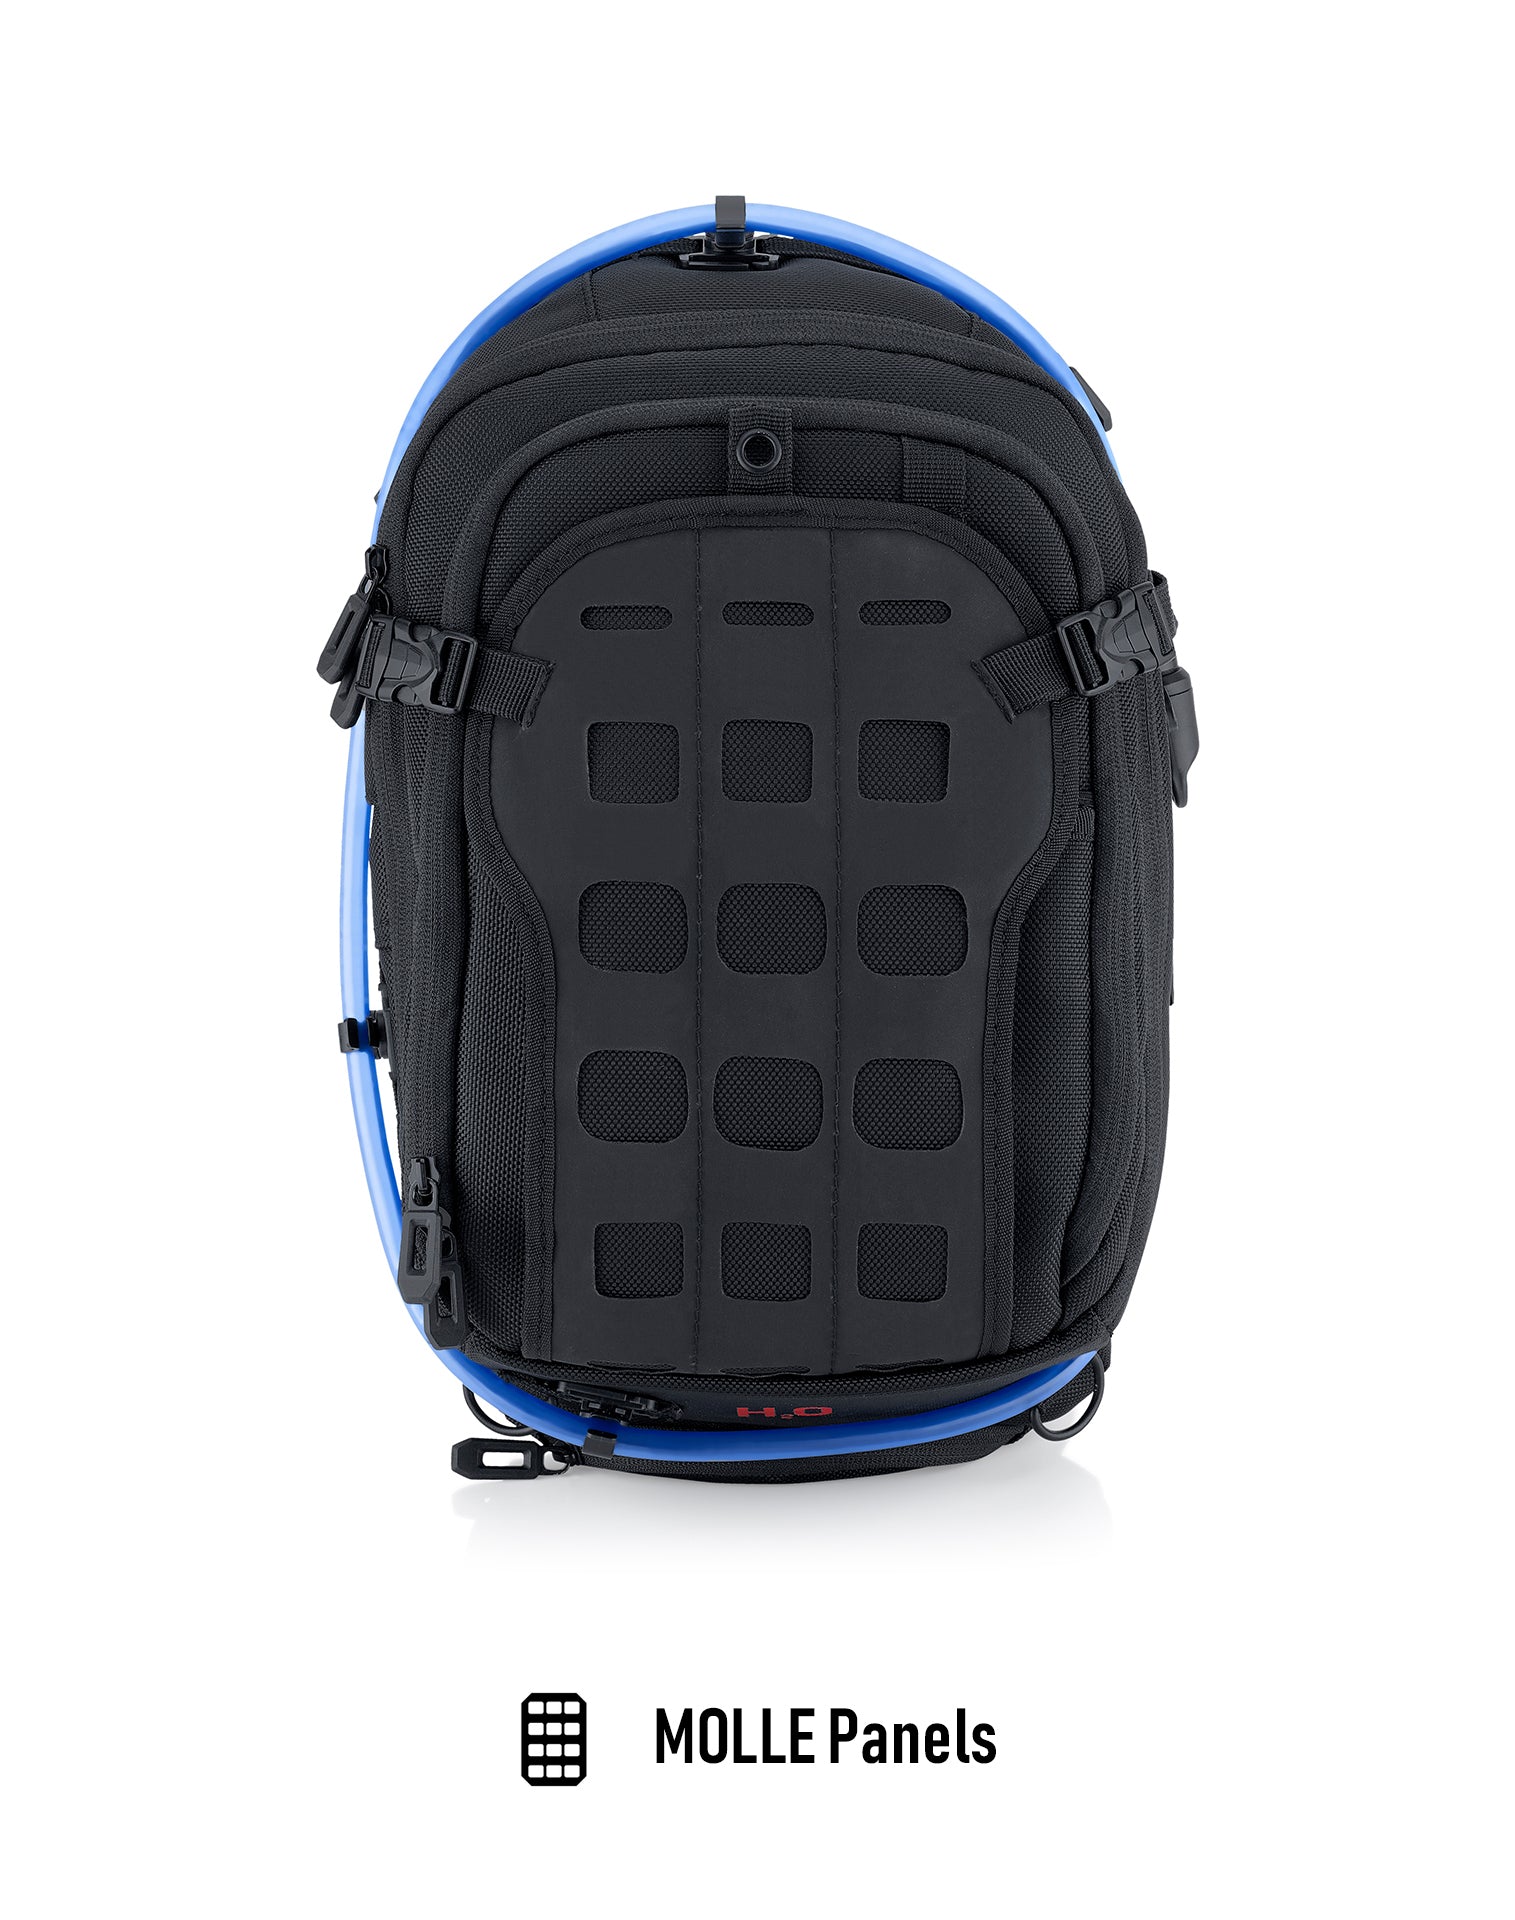 Viking Apex Honda ADV Touring Backpack with Hydration Pack